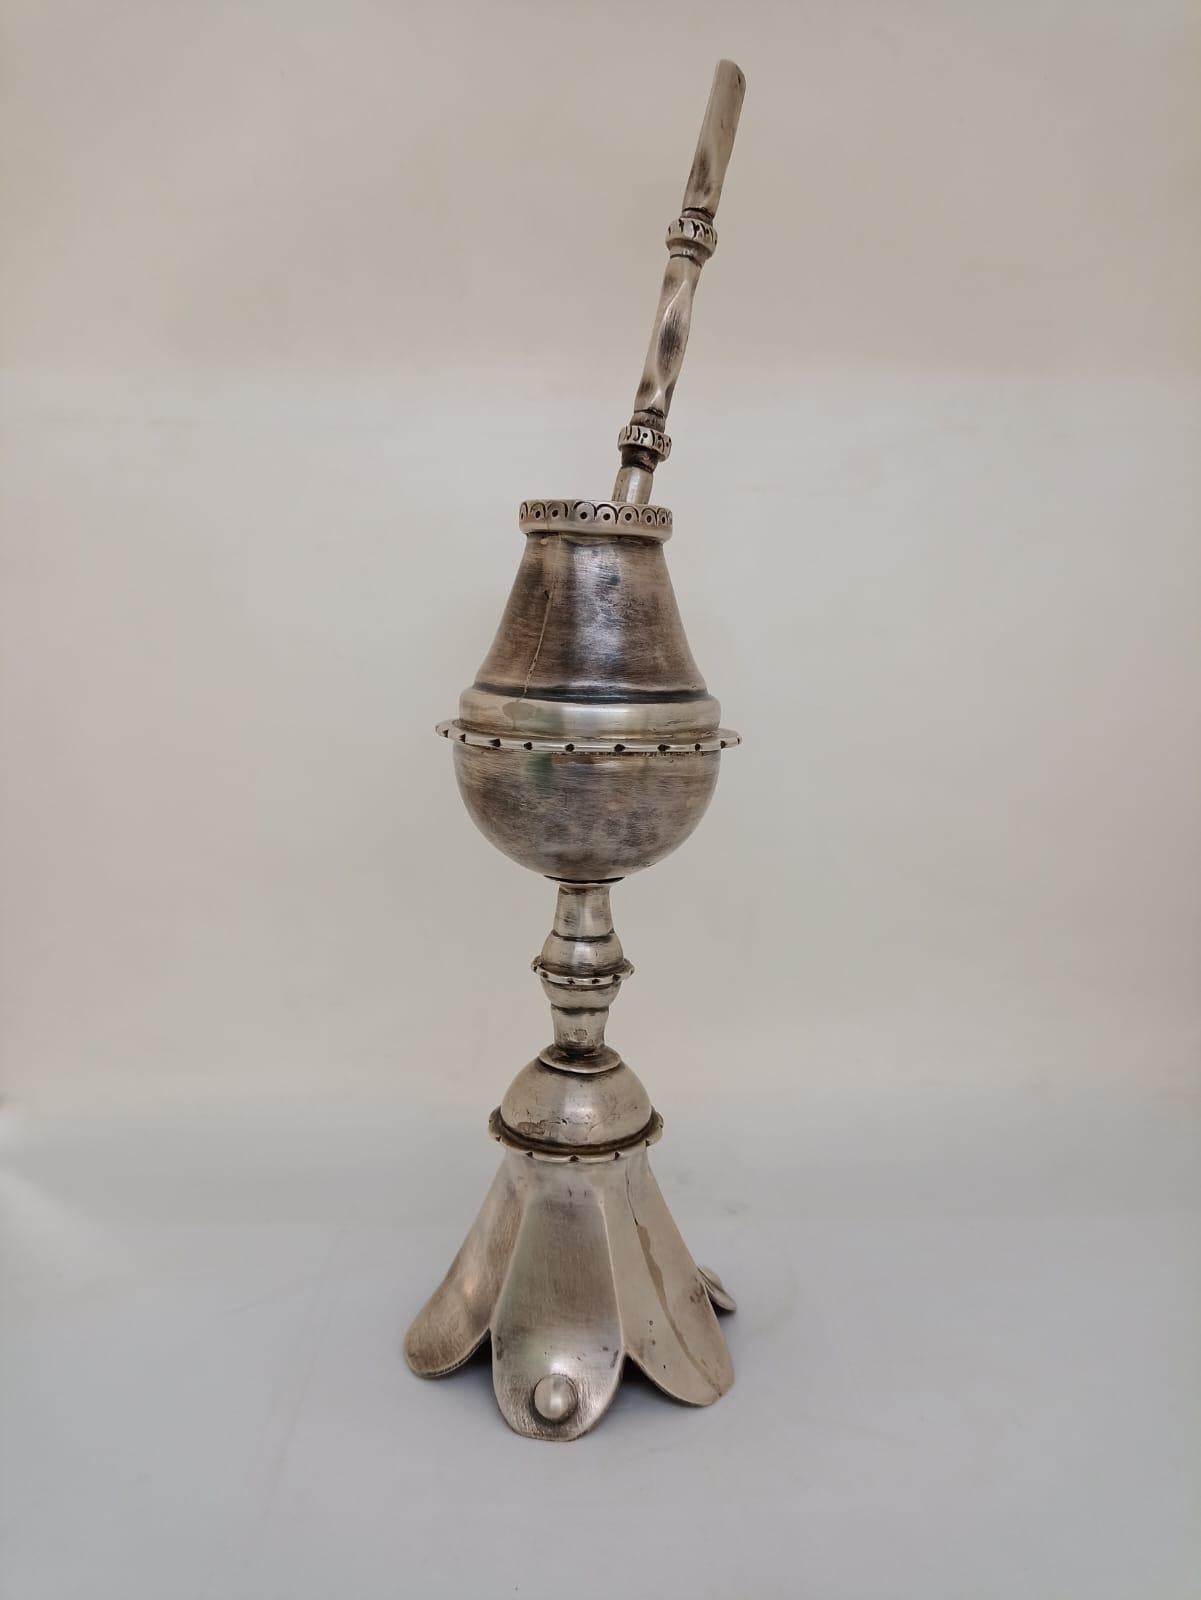 South American silverware Mate chalice type
Silver mate with its absorber tool (bombilla)
Original. No copy
Origin Argentina circa 1900
American Colonial style
Approximate weight of the bulb 400 gr of silver
Excellent condition Natural wear